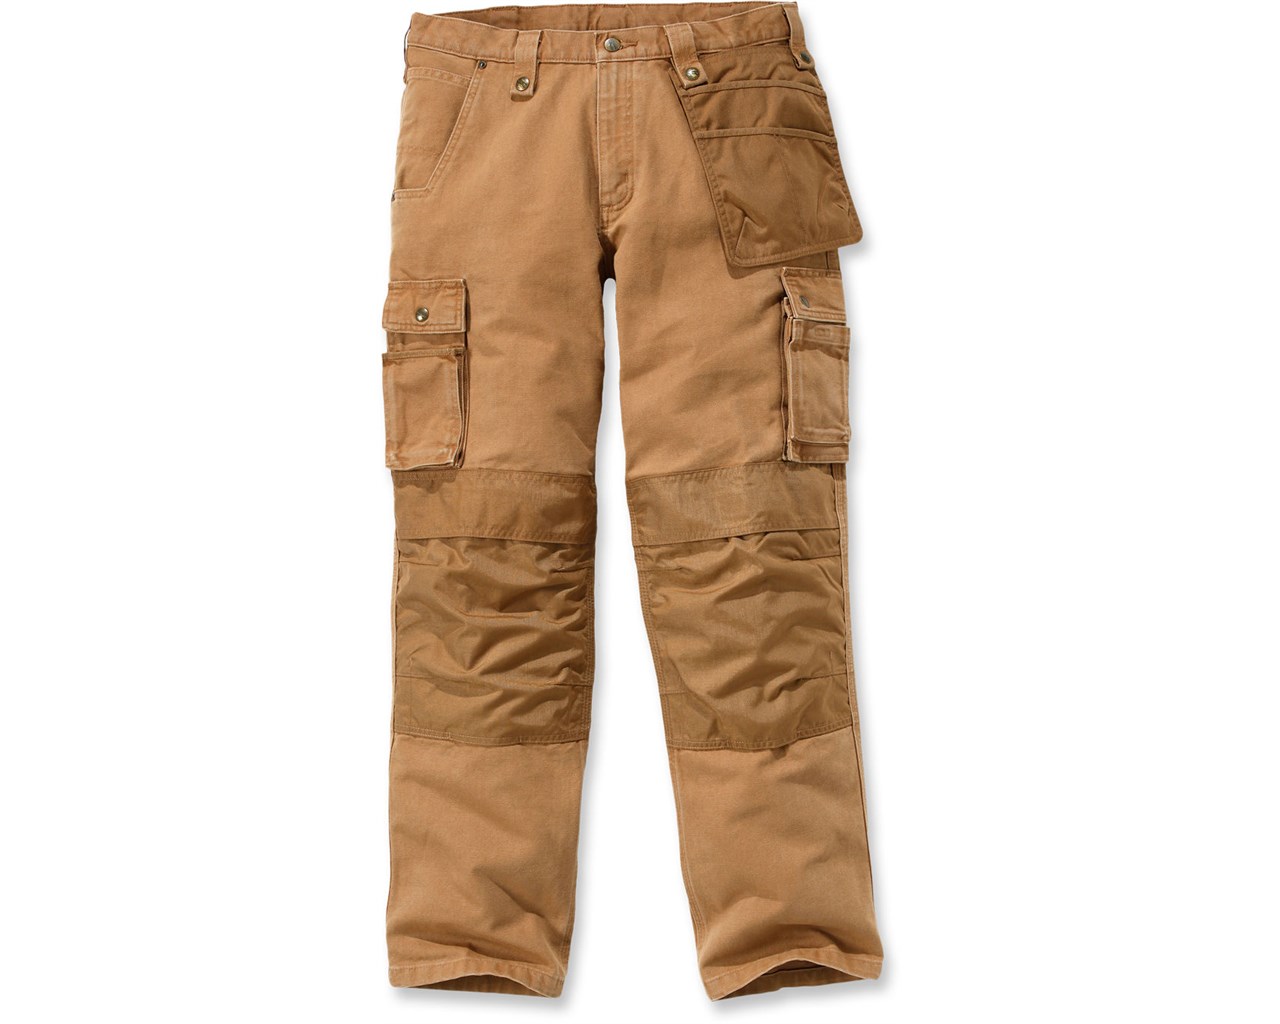 Carhartt Washed Duck Multi Pocket Trousers 101837 - The Workwear Centre